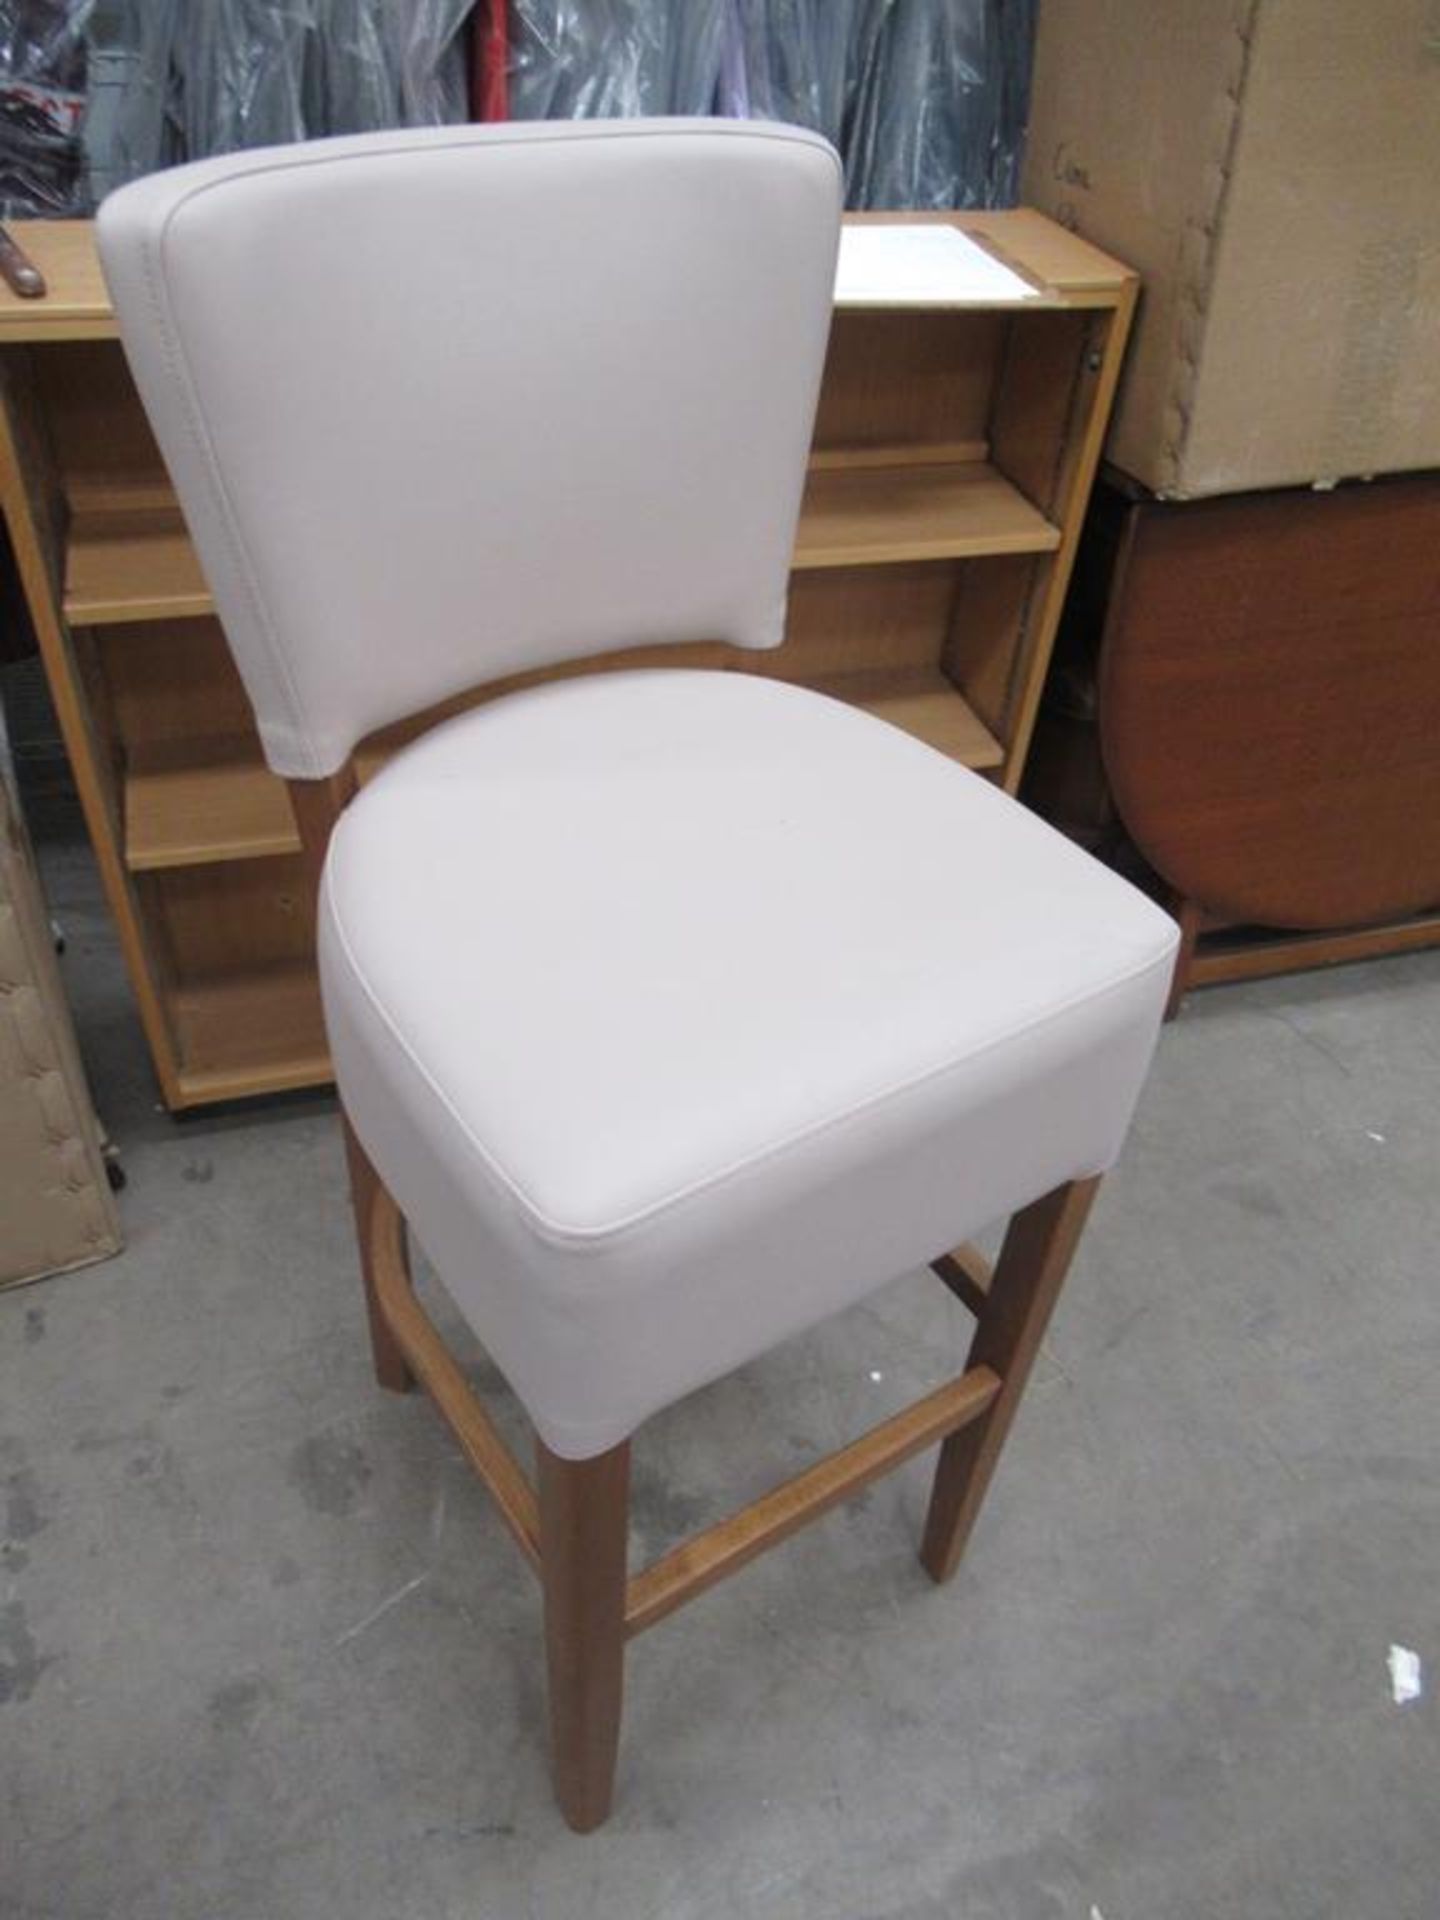 2 x Wooden Chairs, 2 Upholstered Chairs and a Barstool - Image 3 of 3